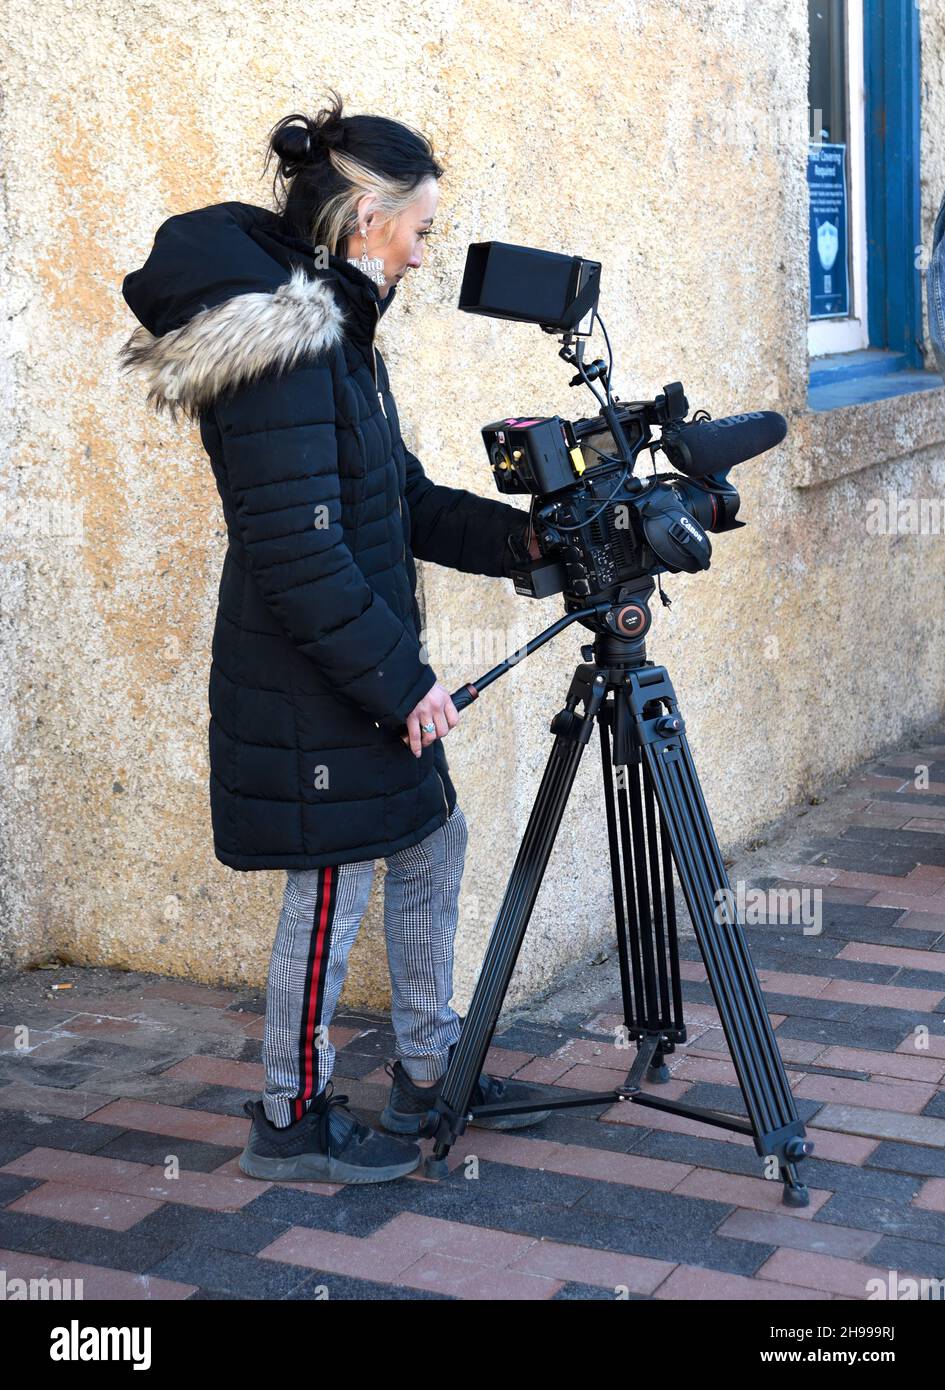 A young filmmaker operates a Canon video camera while making a documentary at the historic Lamy train station in Lamy, New Mexico. Stock Photo